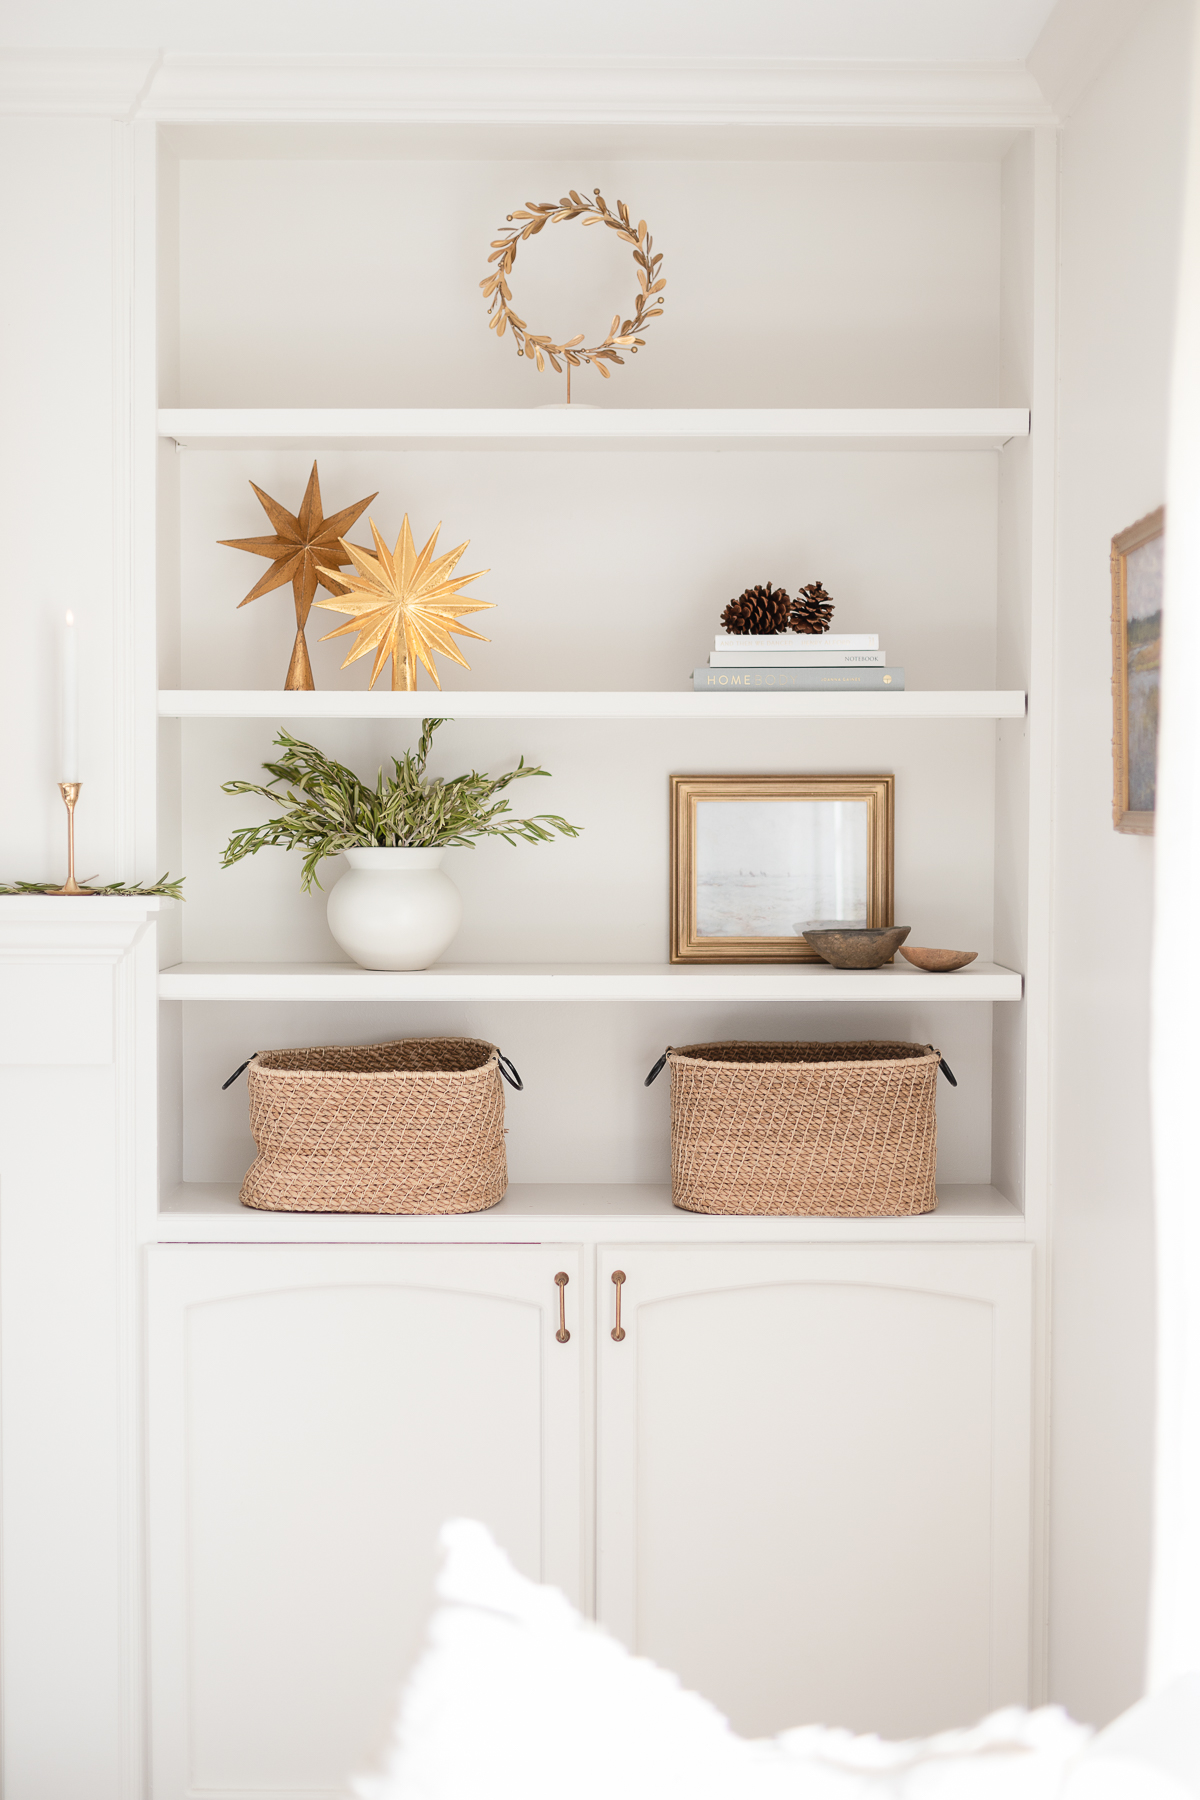 A white shelf with baskets and a fireplace adorned with laurel wreaths.